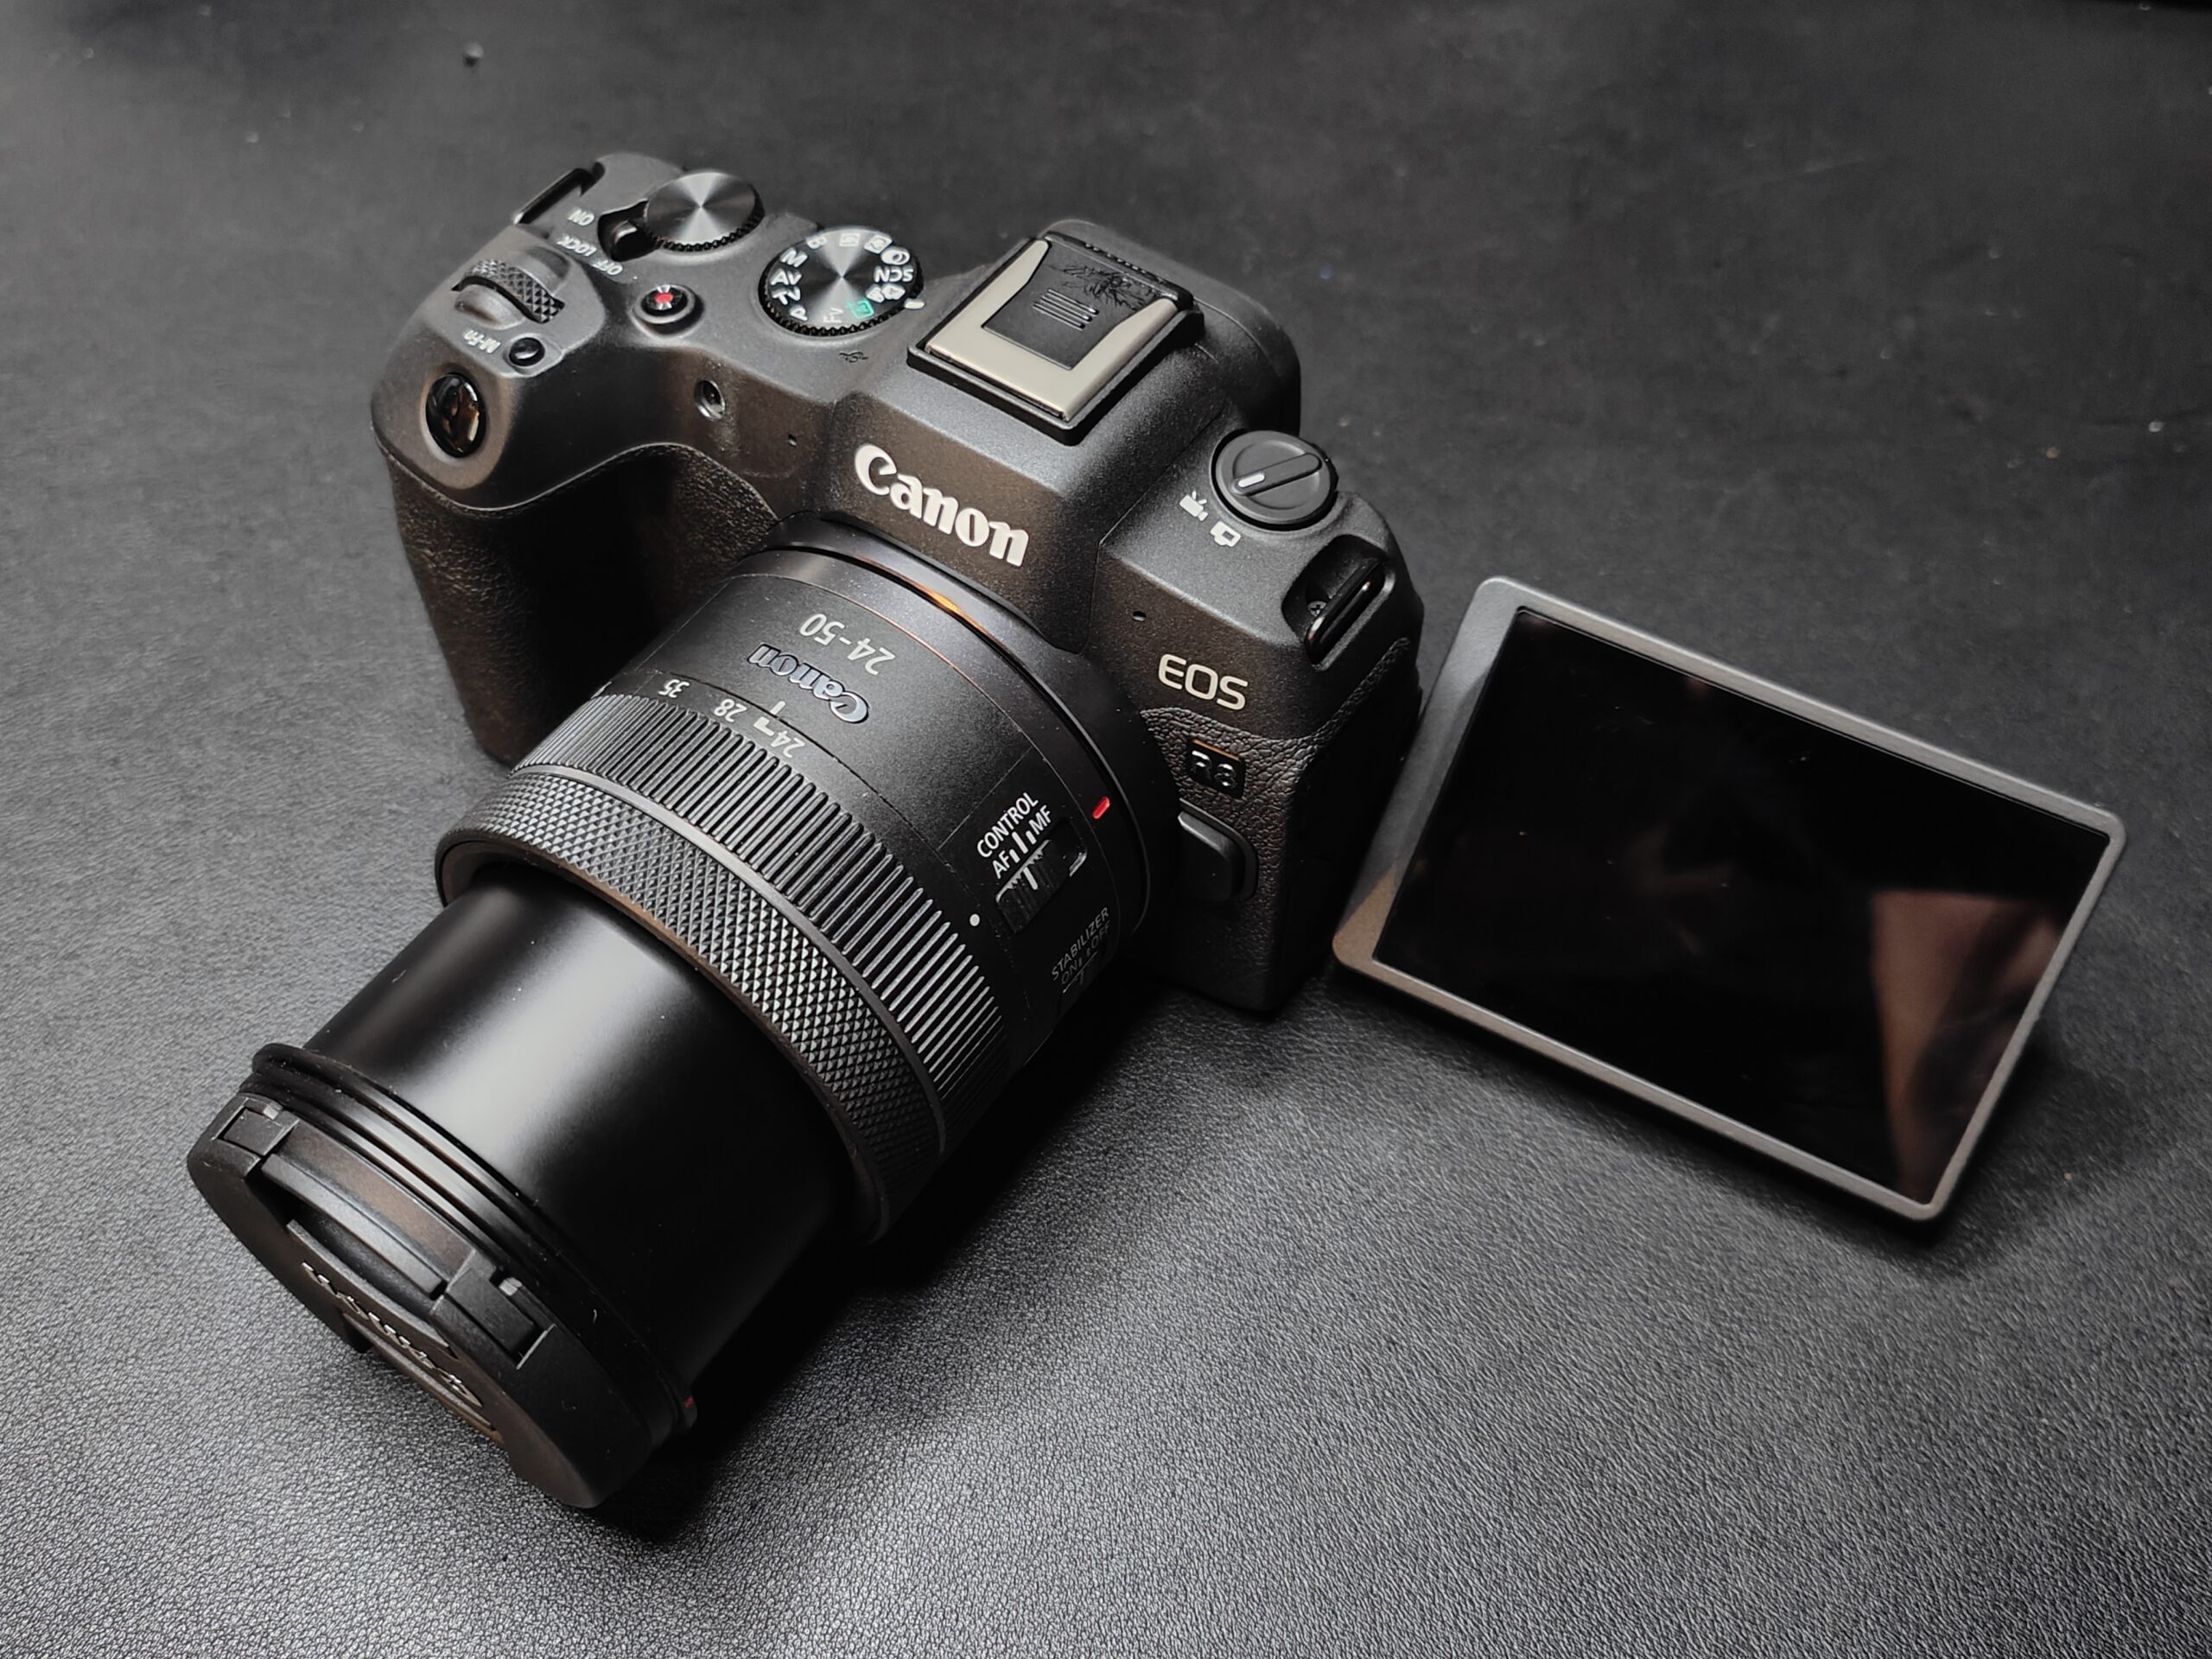 Canon EOS R8 Review - Forbes Vetted